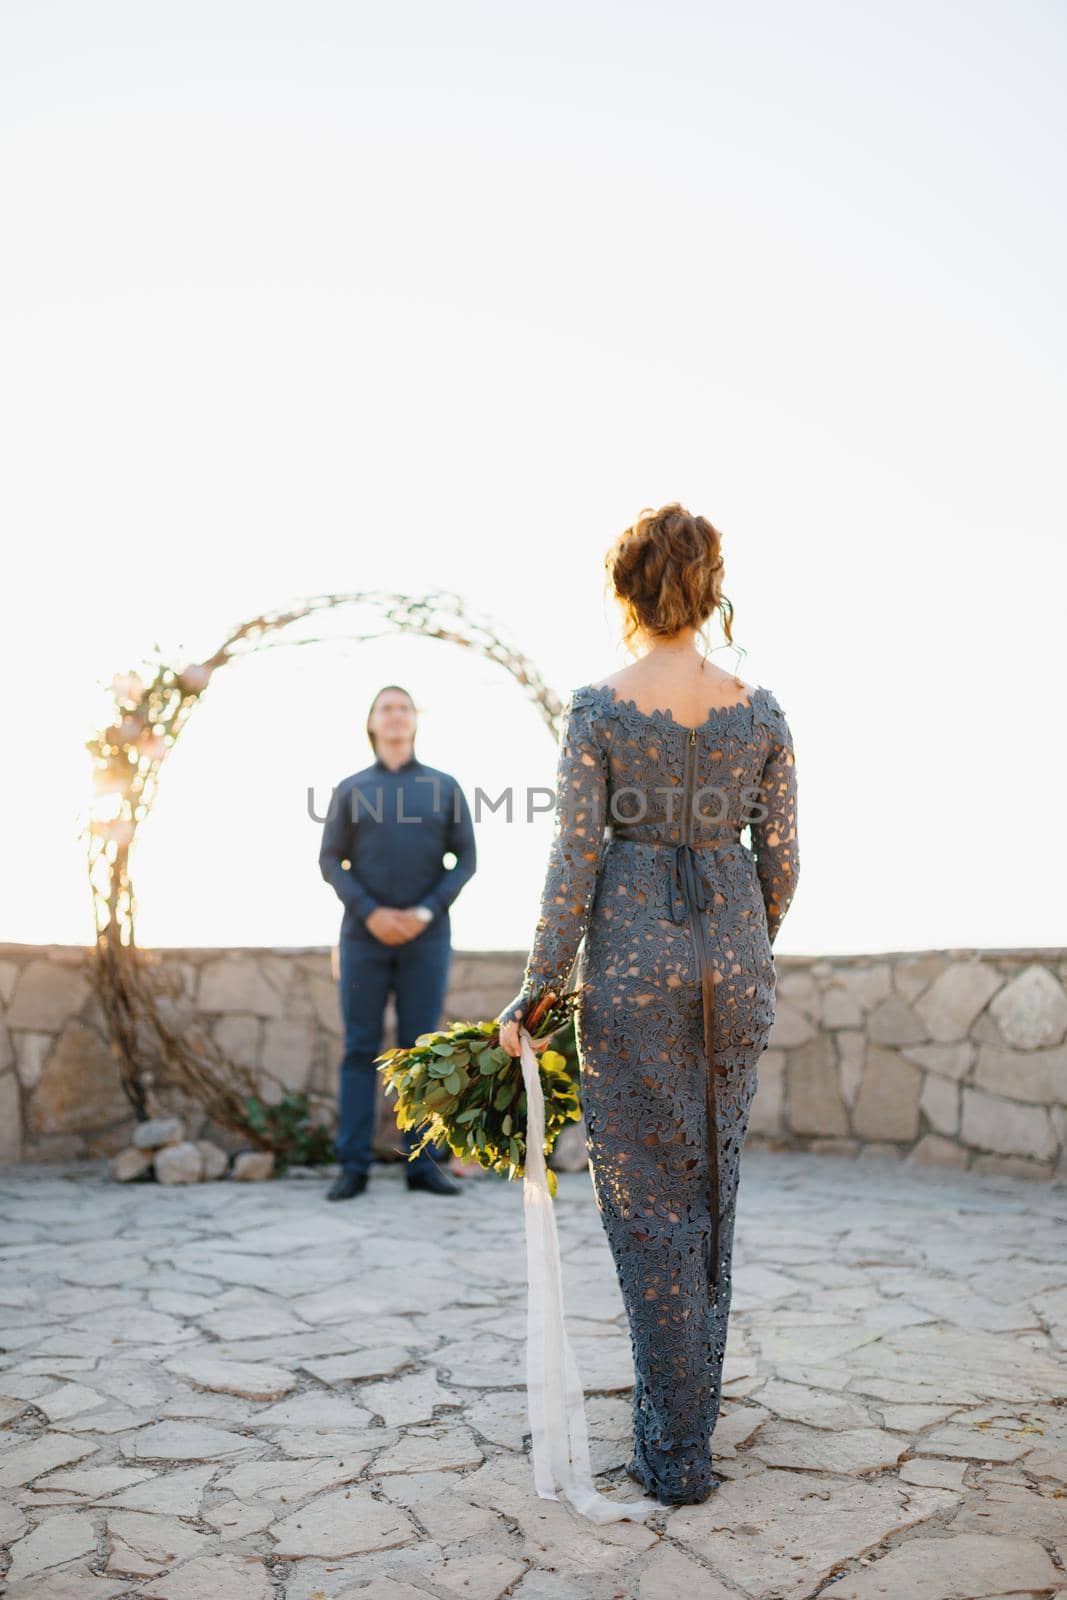 A bride with a bouquet in her hand goes to the groom who is waiting for her at the wedding arch by Nadtochiy